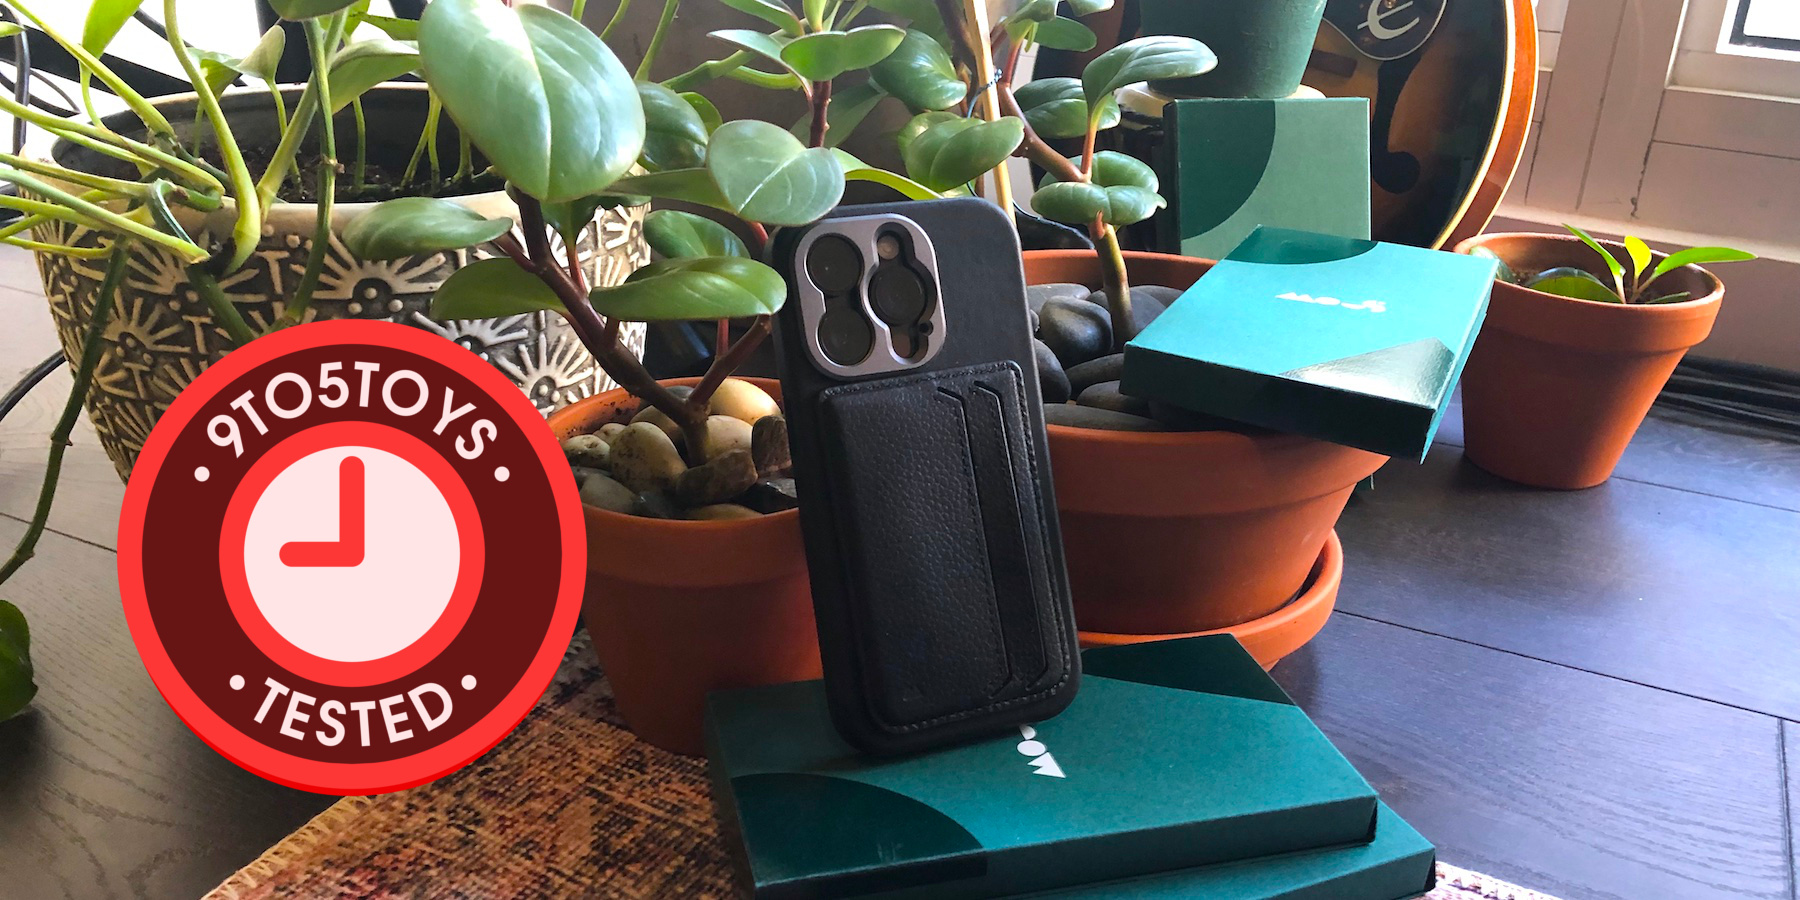 Mous, Protective AirPods Case